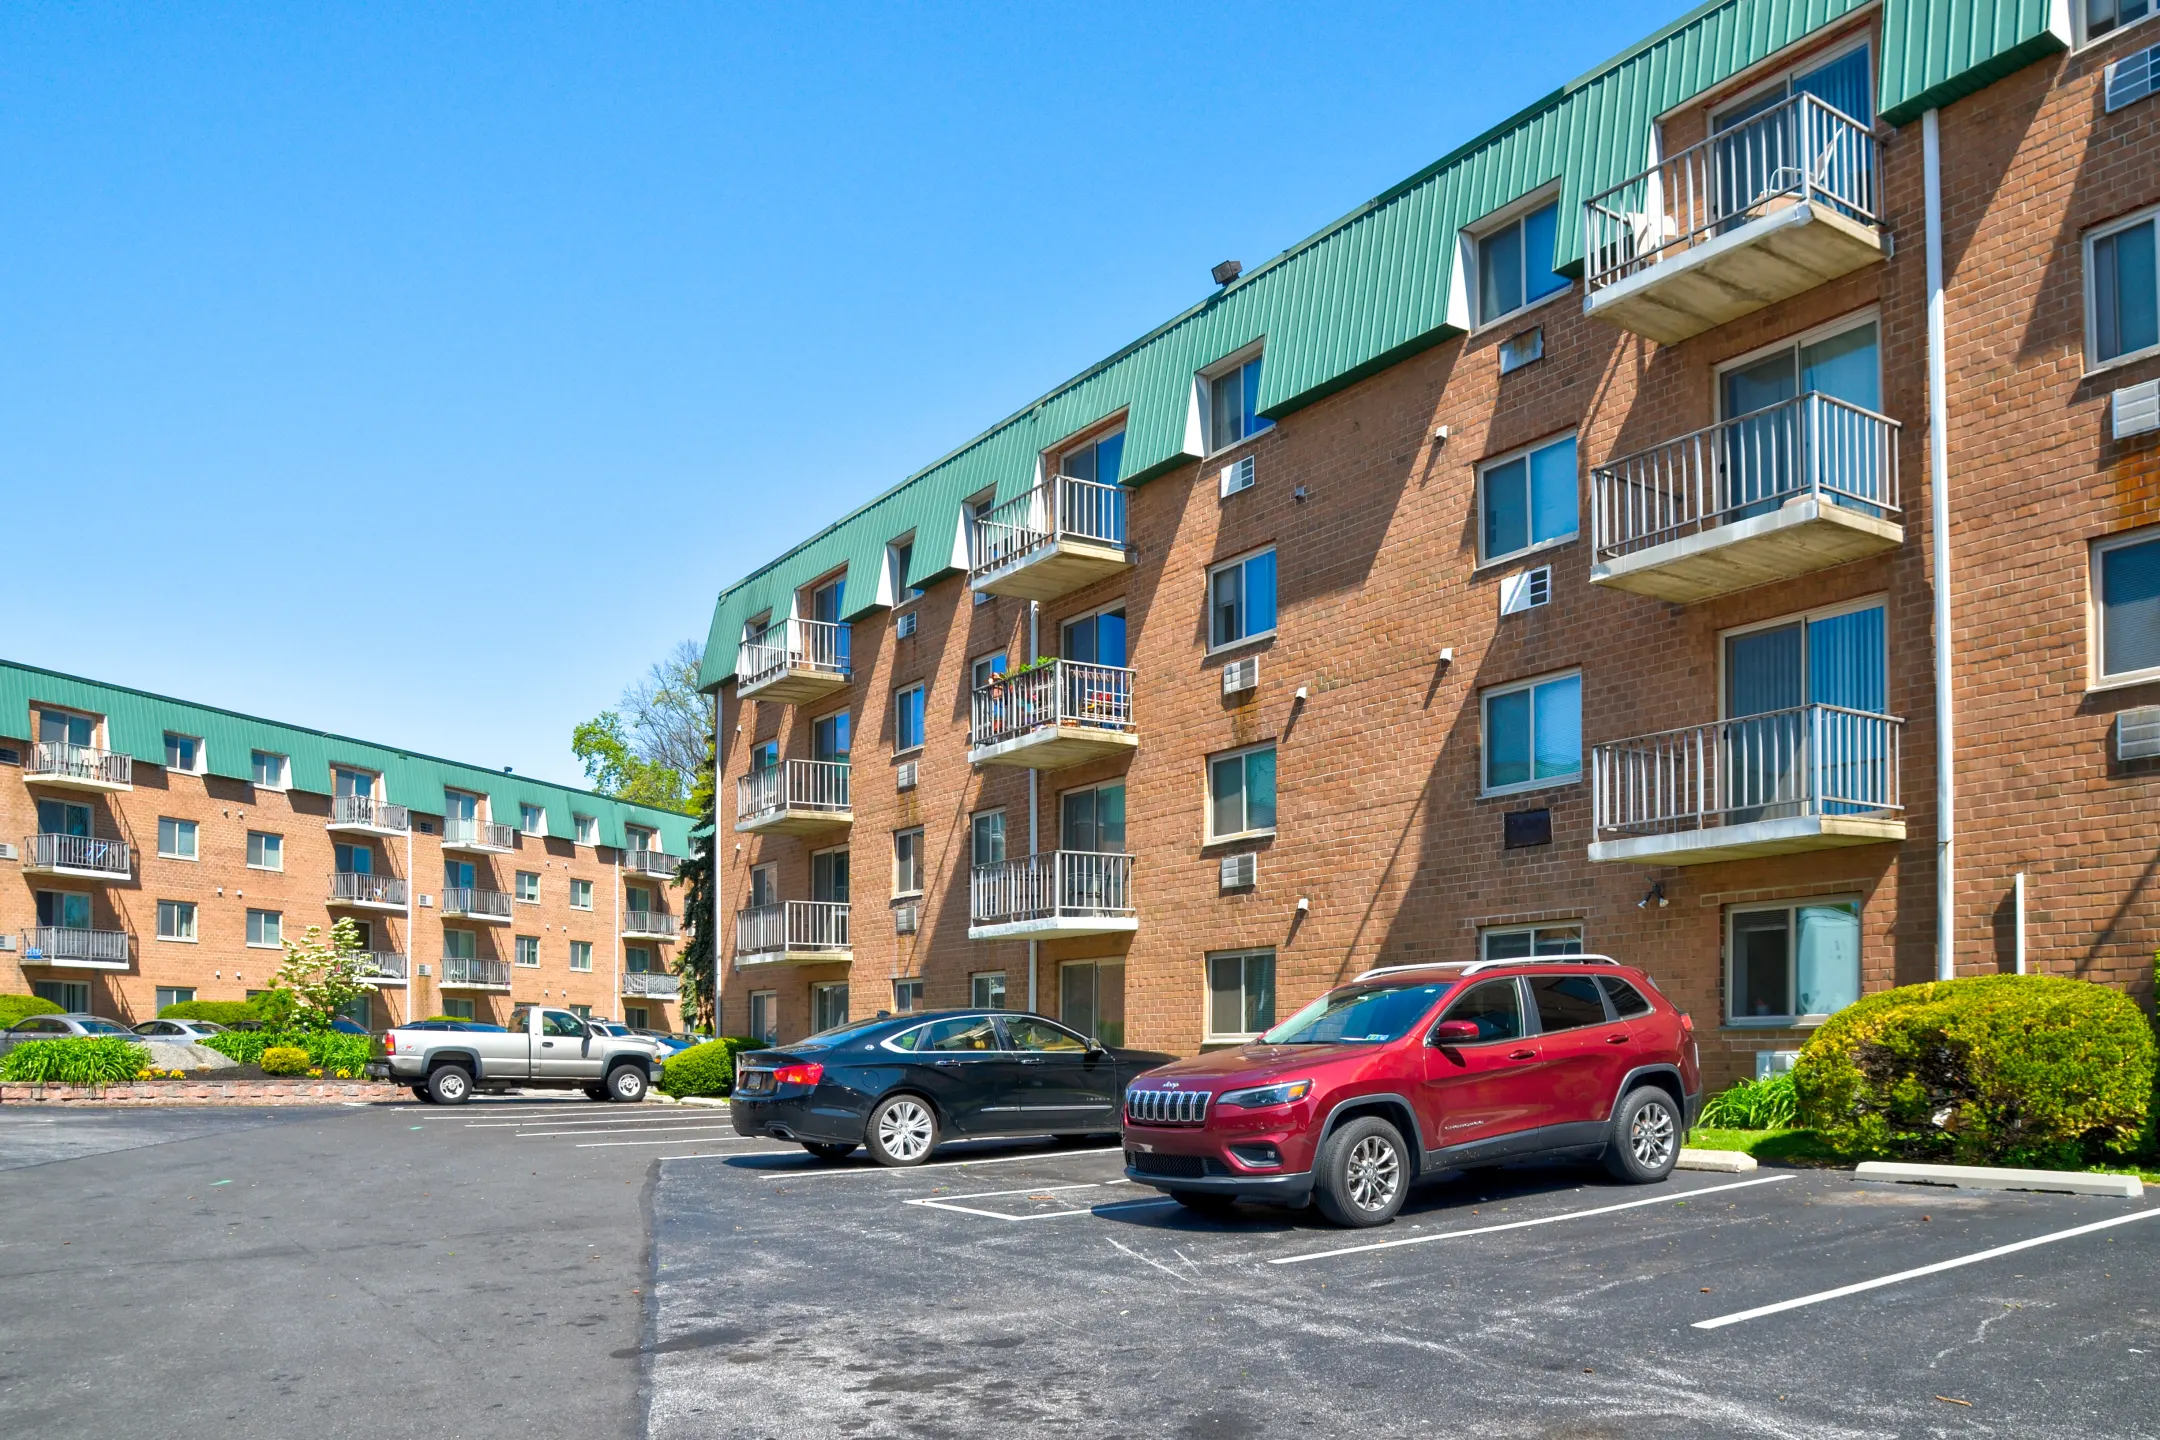 Building - Merion Trace Apartments - Upper Darby, PA